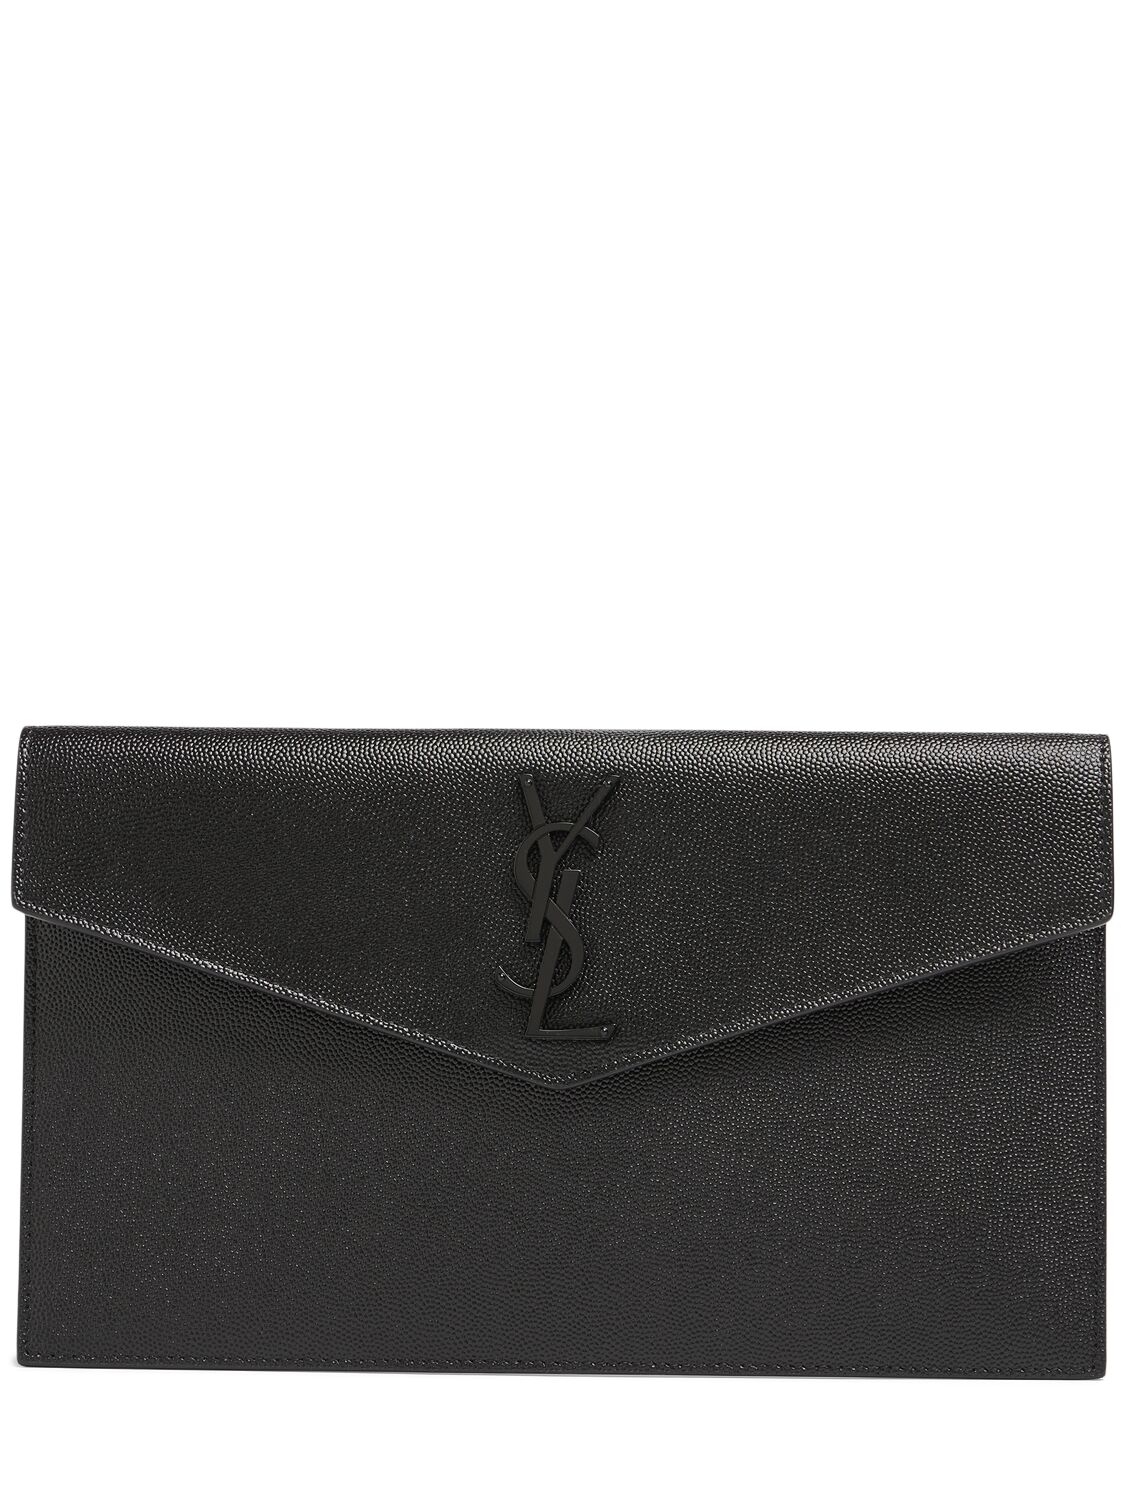 Uptown Leather Clutch